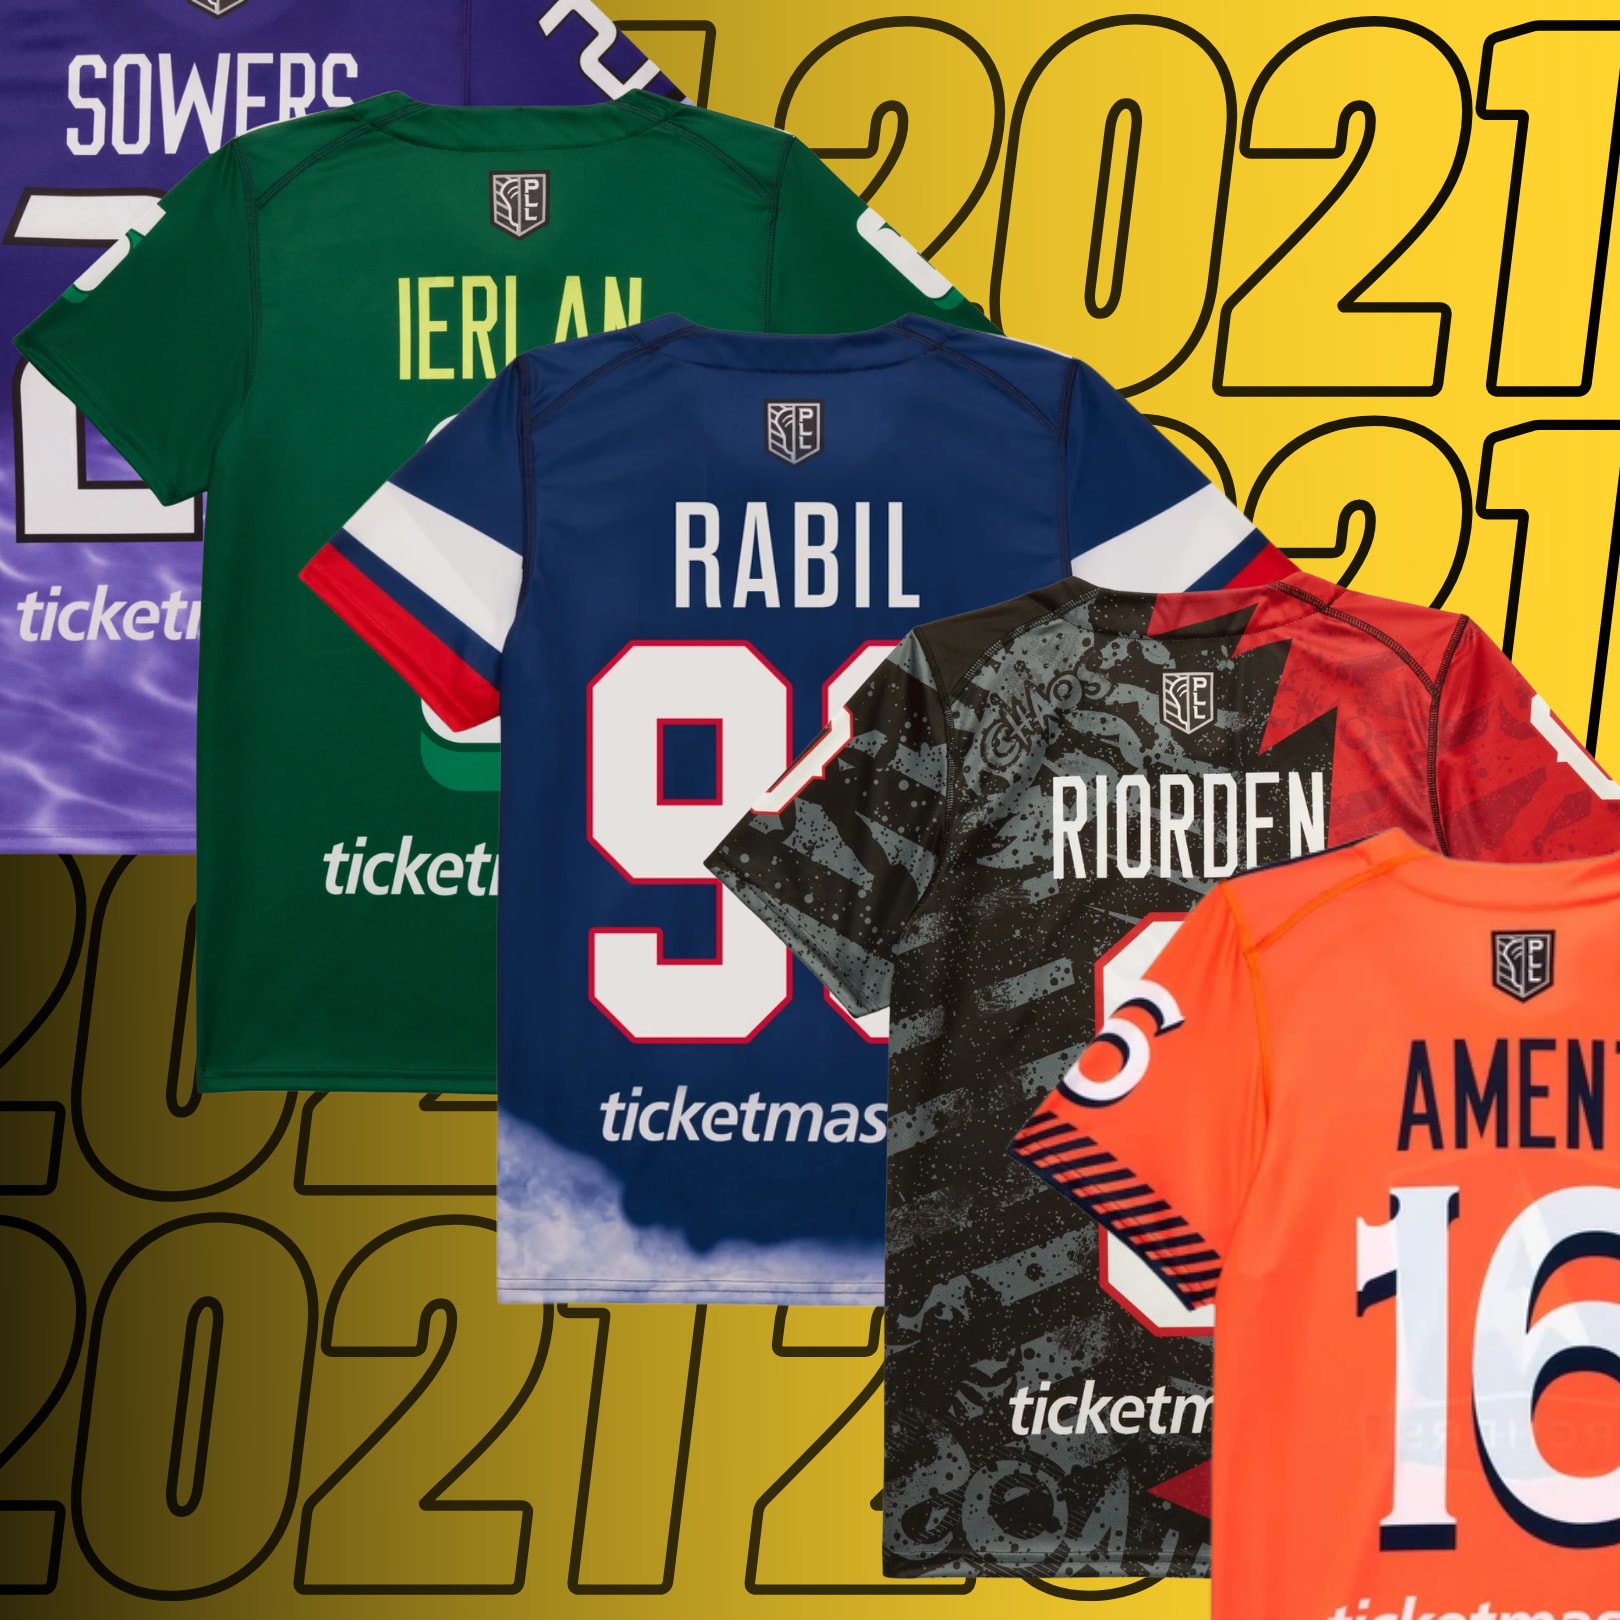 Top Selling PLL Jerseys from the 2021 Season - Lacrosse All Stars